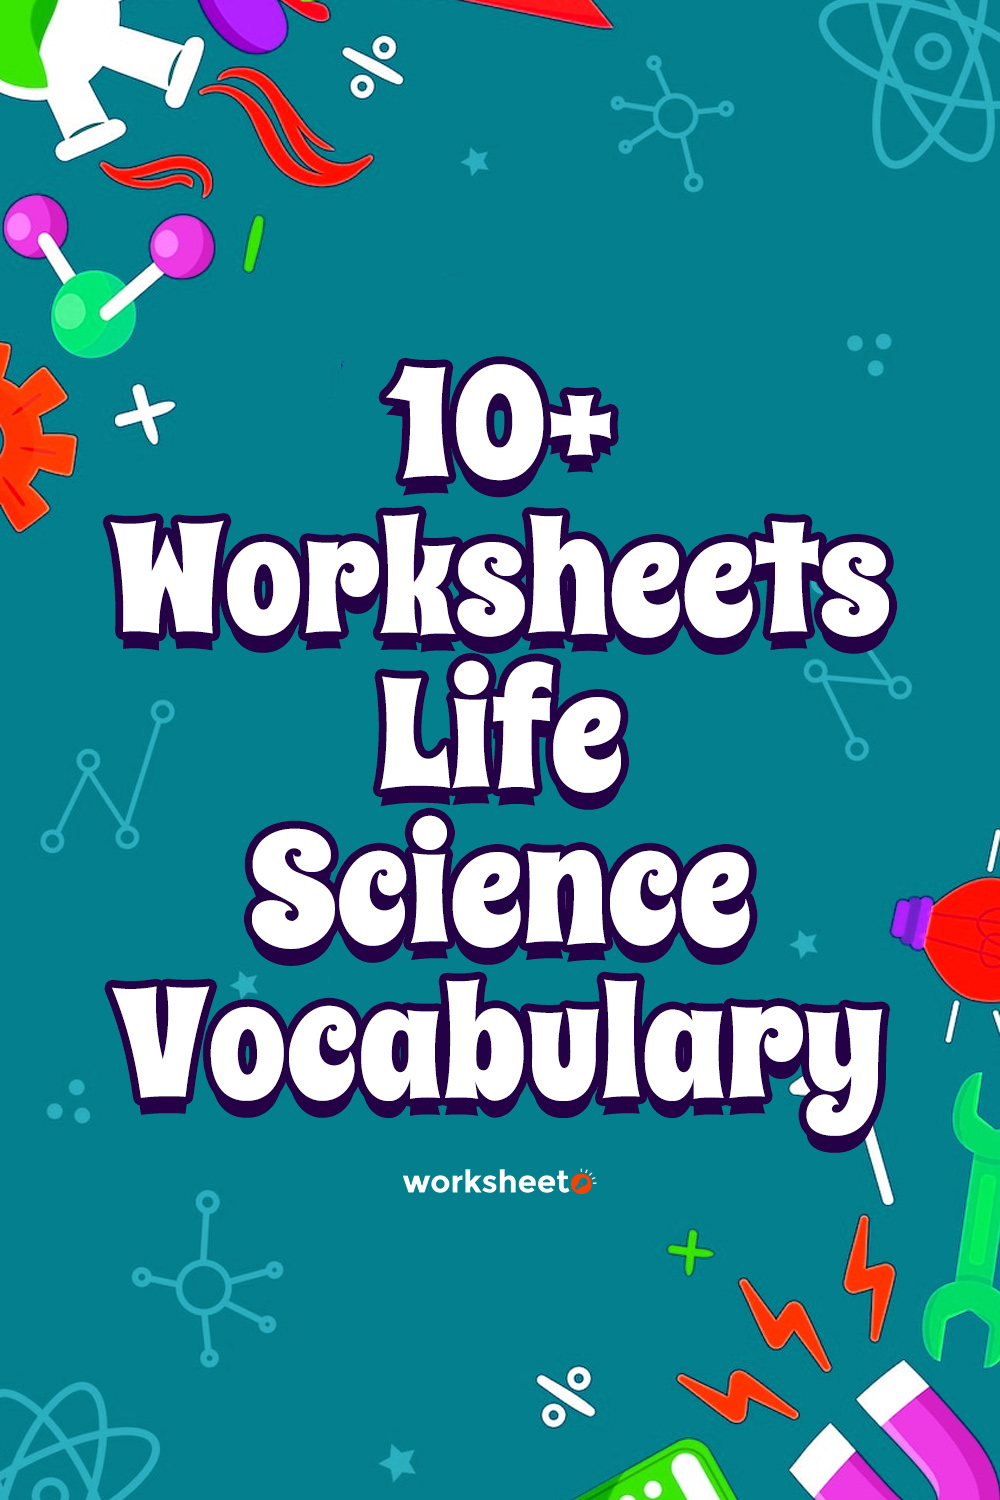 Worksheets Life Science Vocabulary